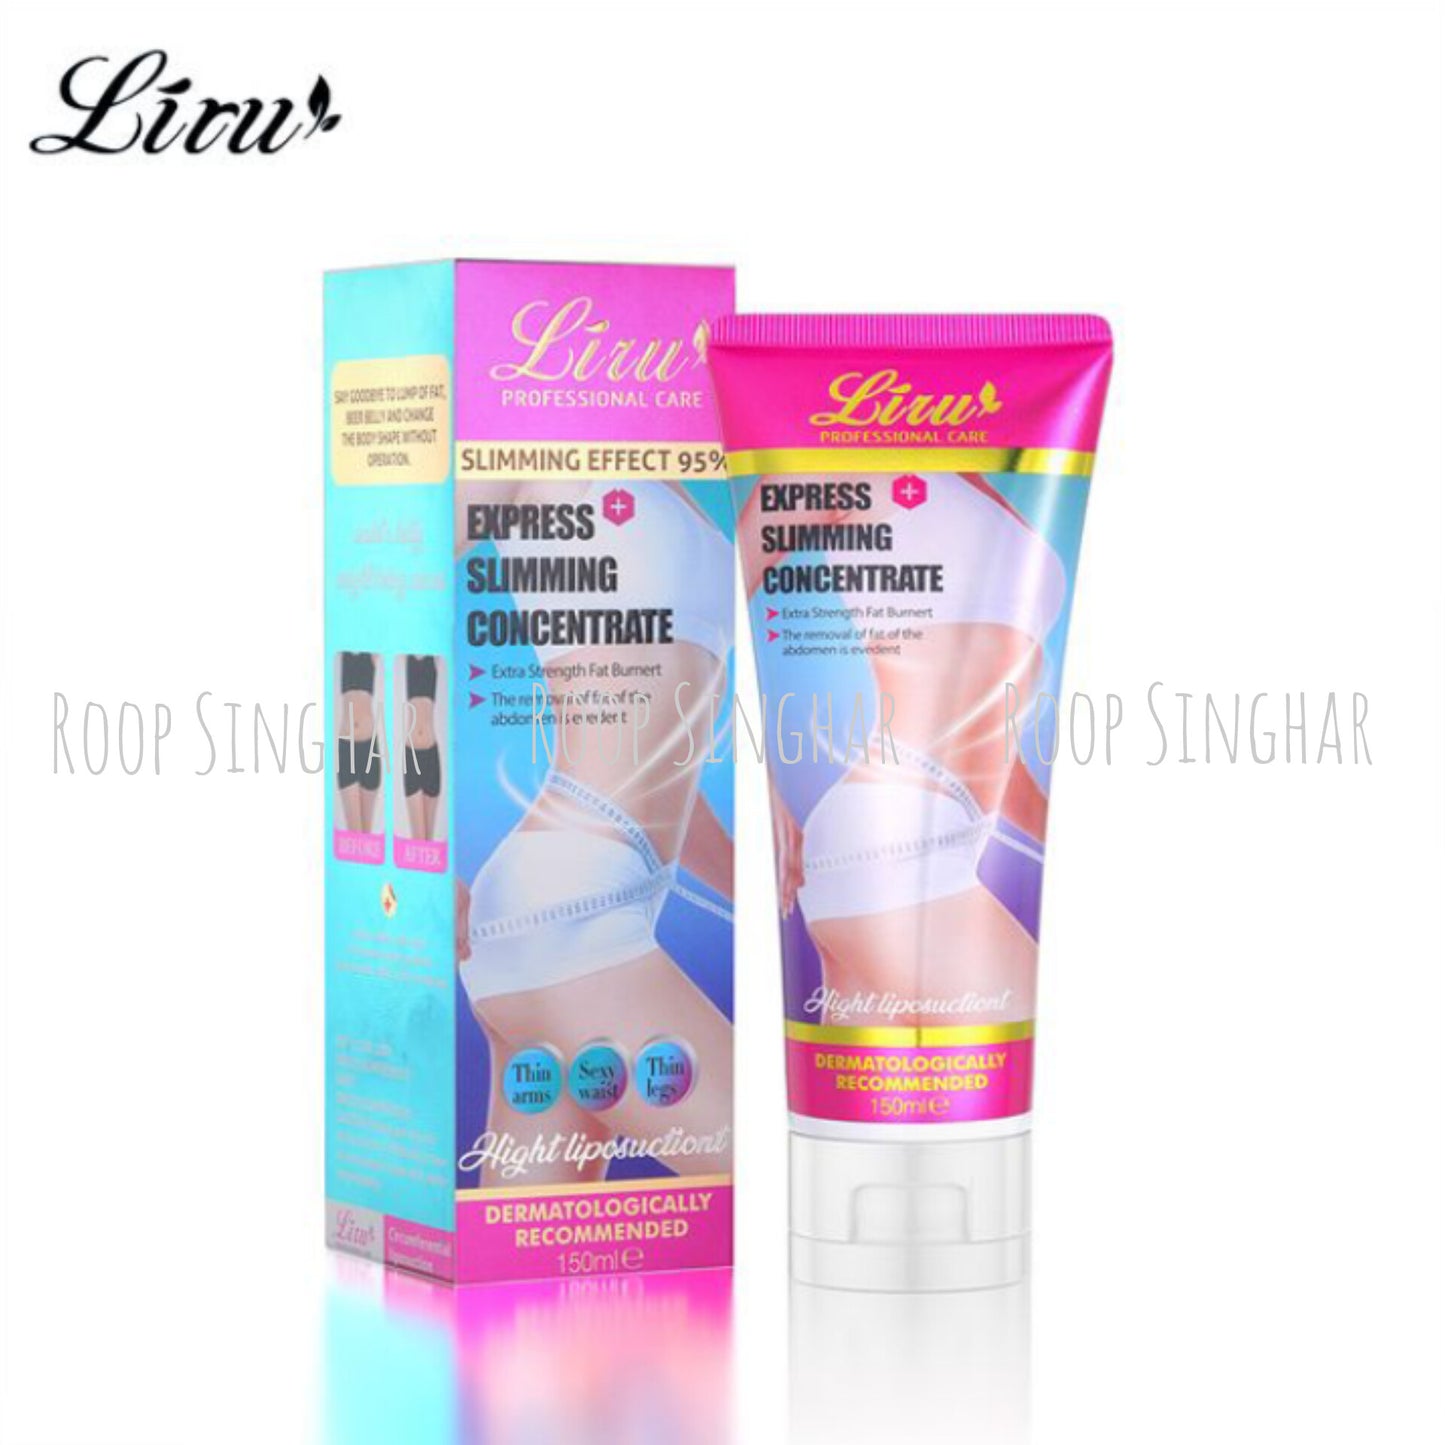 Liru PROFESSIONAL CARE SLIMMING EFFECT 95% EXPRESS.                                    SLIMMING.                                                CONCENTRATE (150ml)